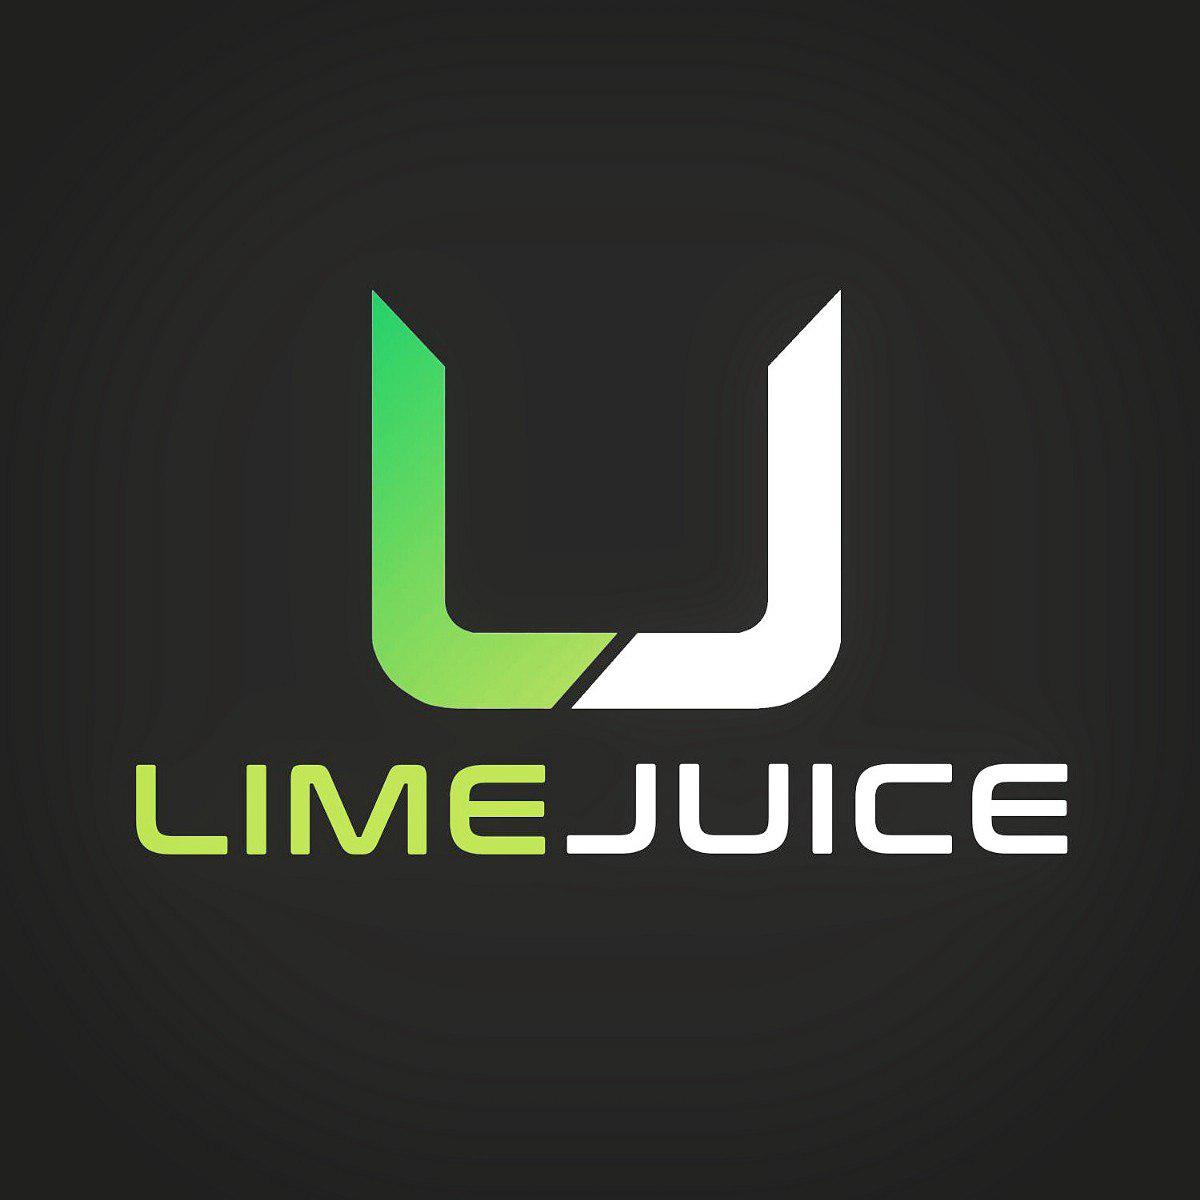 LimeJuice Crypto Gaming A new blockchain games company named LimeJuice officially launched yesterday March 19, 2019. Made by the Founders of Proton Gaming Esports LimeJuice is going to be involved in building, marketing, developing DAPPS and will house various eSports teams.